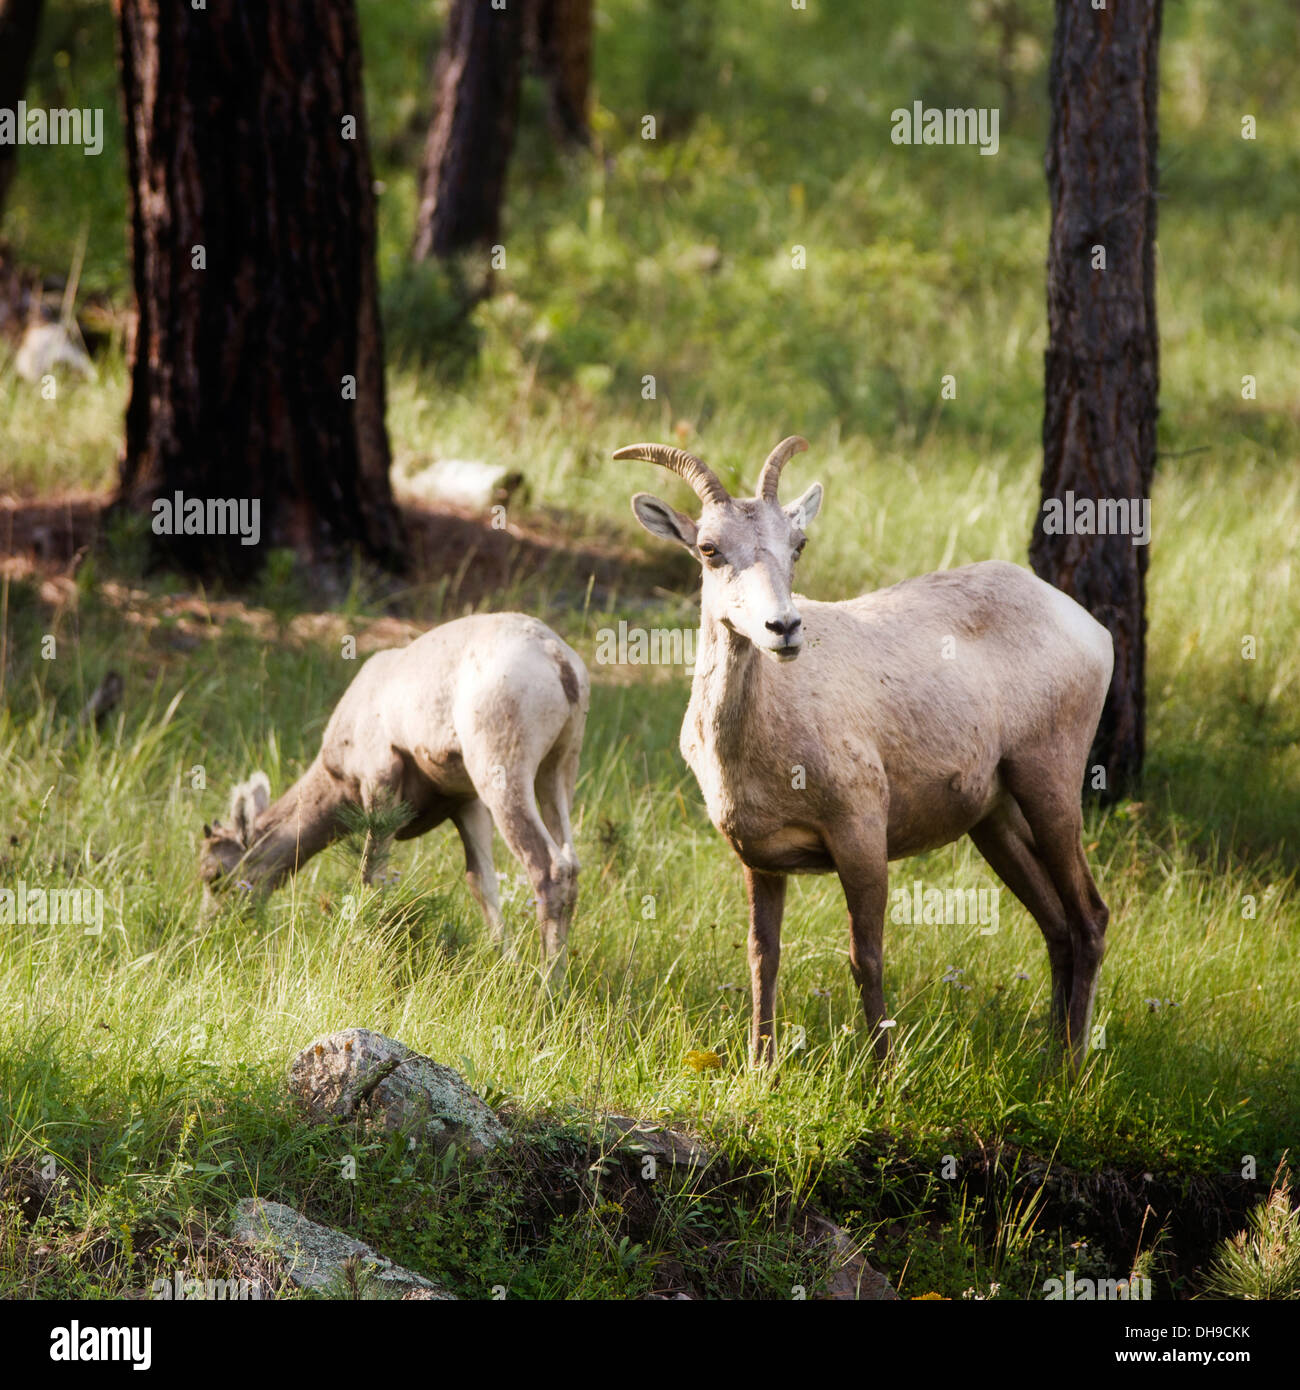 Two Mountain goats in a grassy forest in the Black Hills of South Dakota. Stock Photo